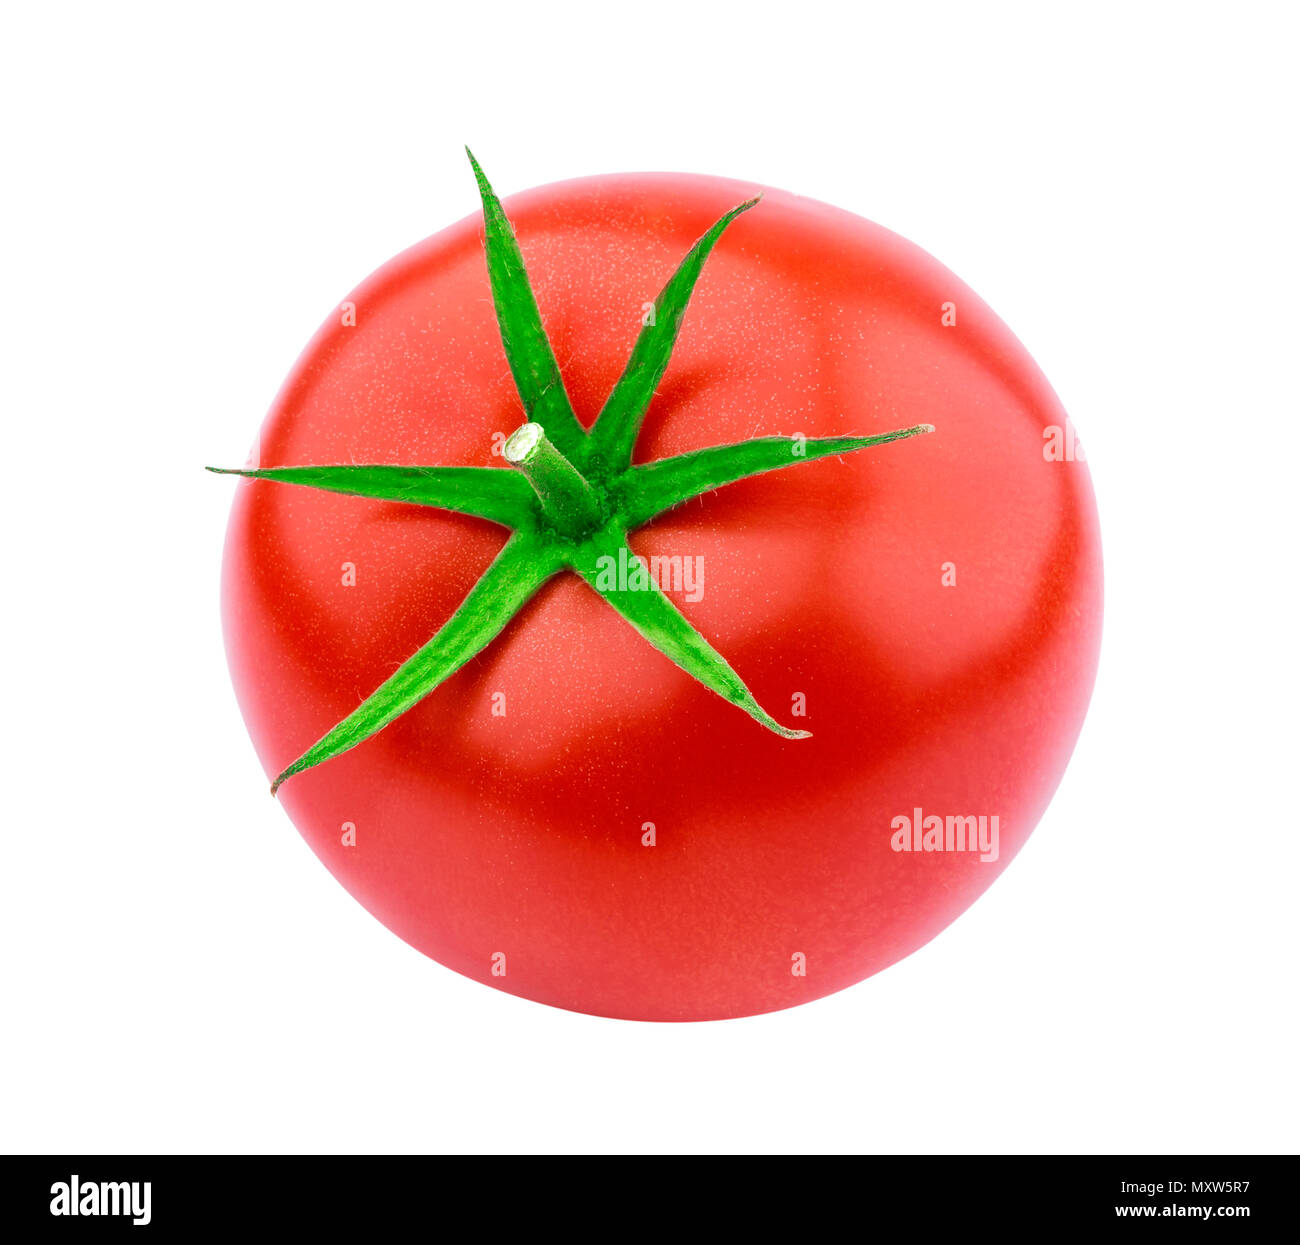 One whole tomato isolated isolated on white background with clipping path Stock Photo